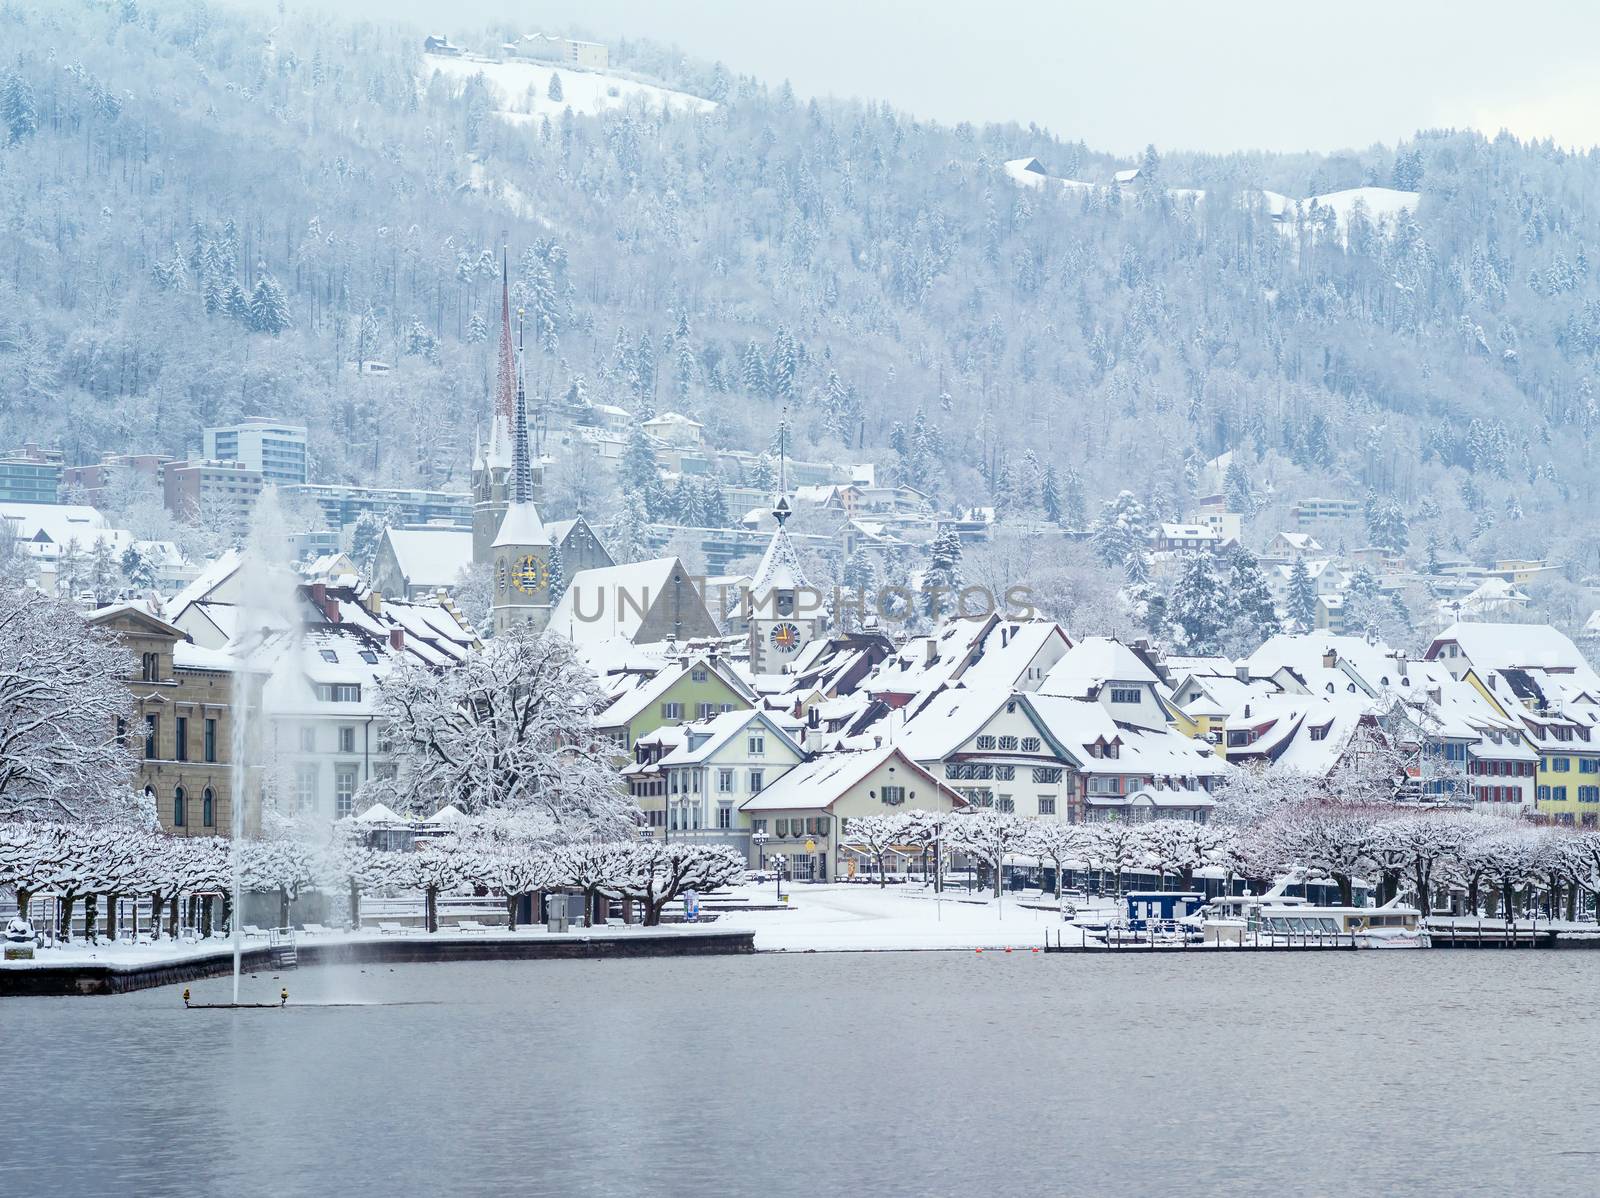 Photo of Zug Switzerland in January after a long snowstorm. Photo taken December 31, 2014.